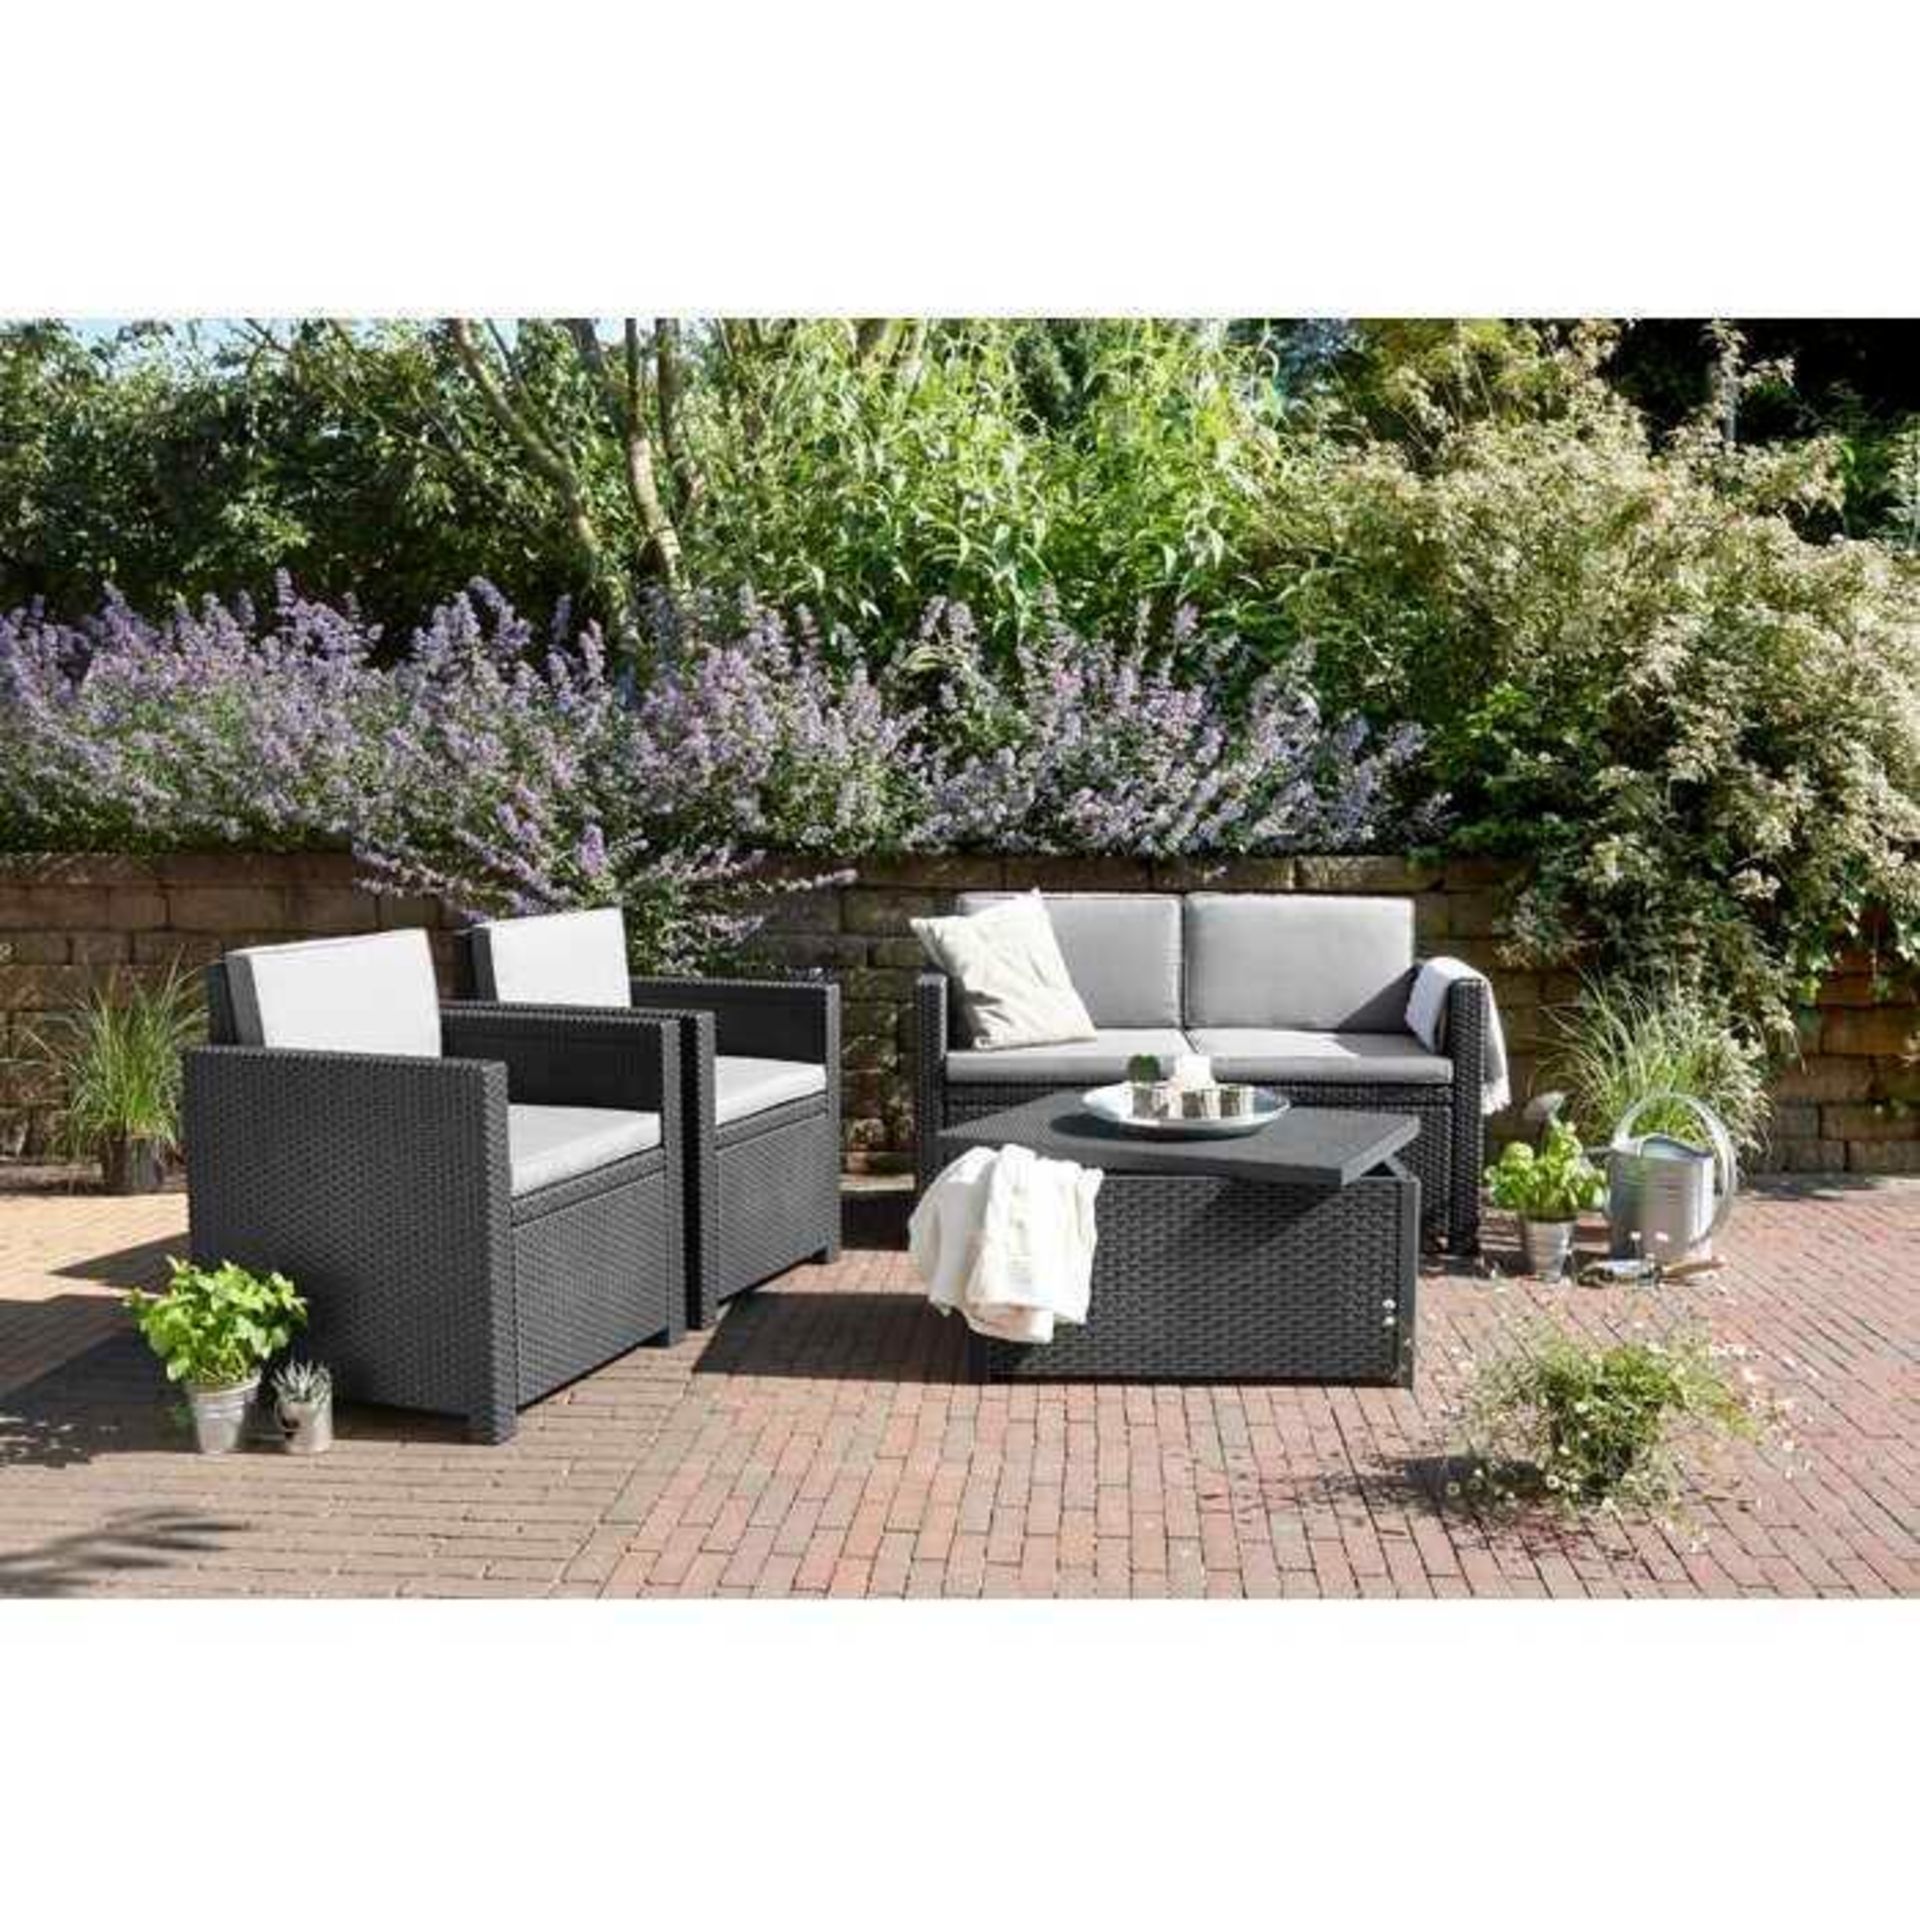 (Jm) RRP £450 Lot To Contain Rattan 4 Person Seating With Cushions - Image 2 of 4